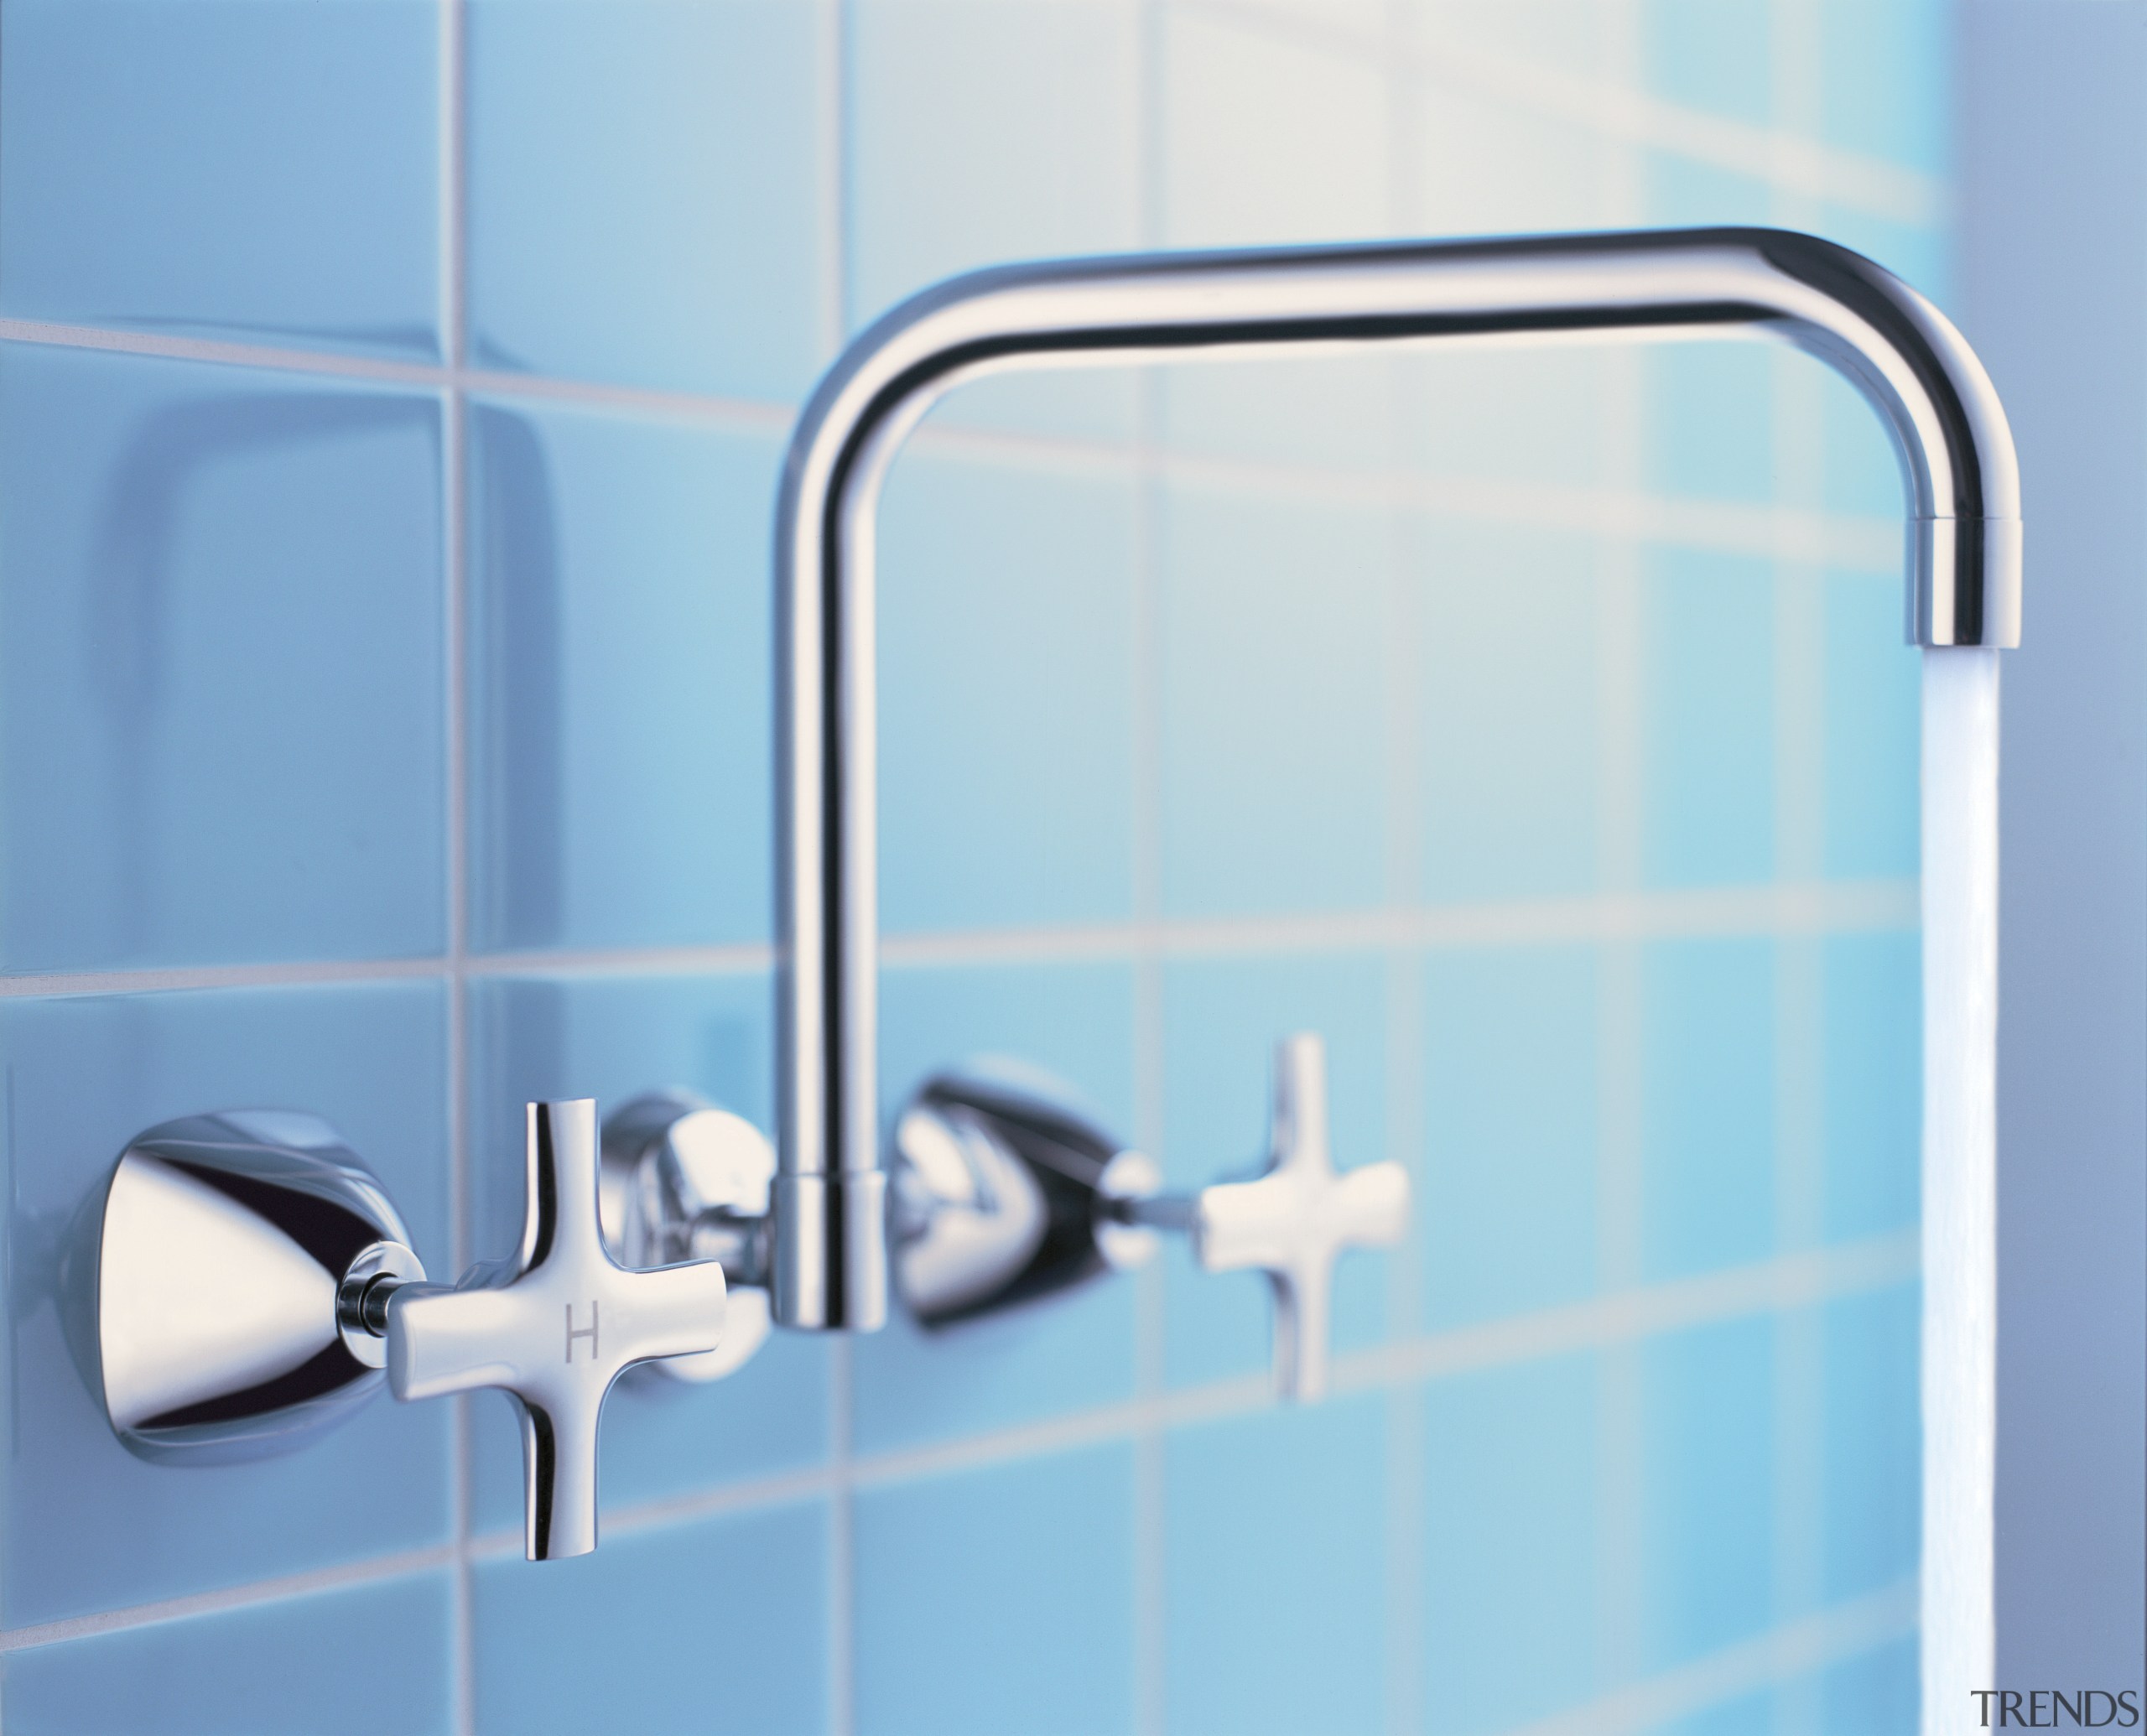 Tapware set into wall with blue tiles behind. blue, line, plumbing fixture, product, product design, tap, teal, white